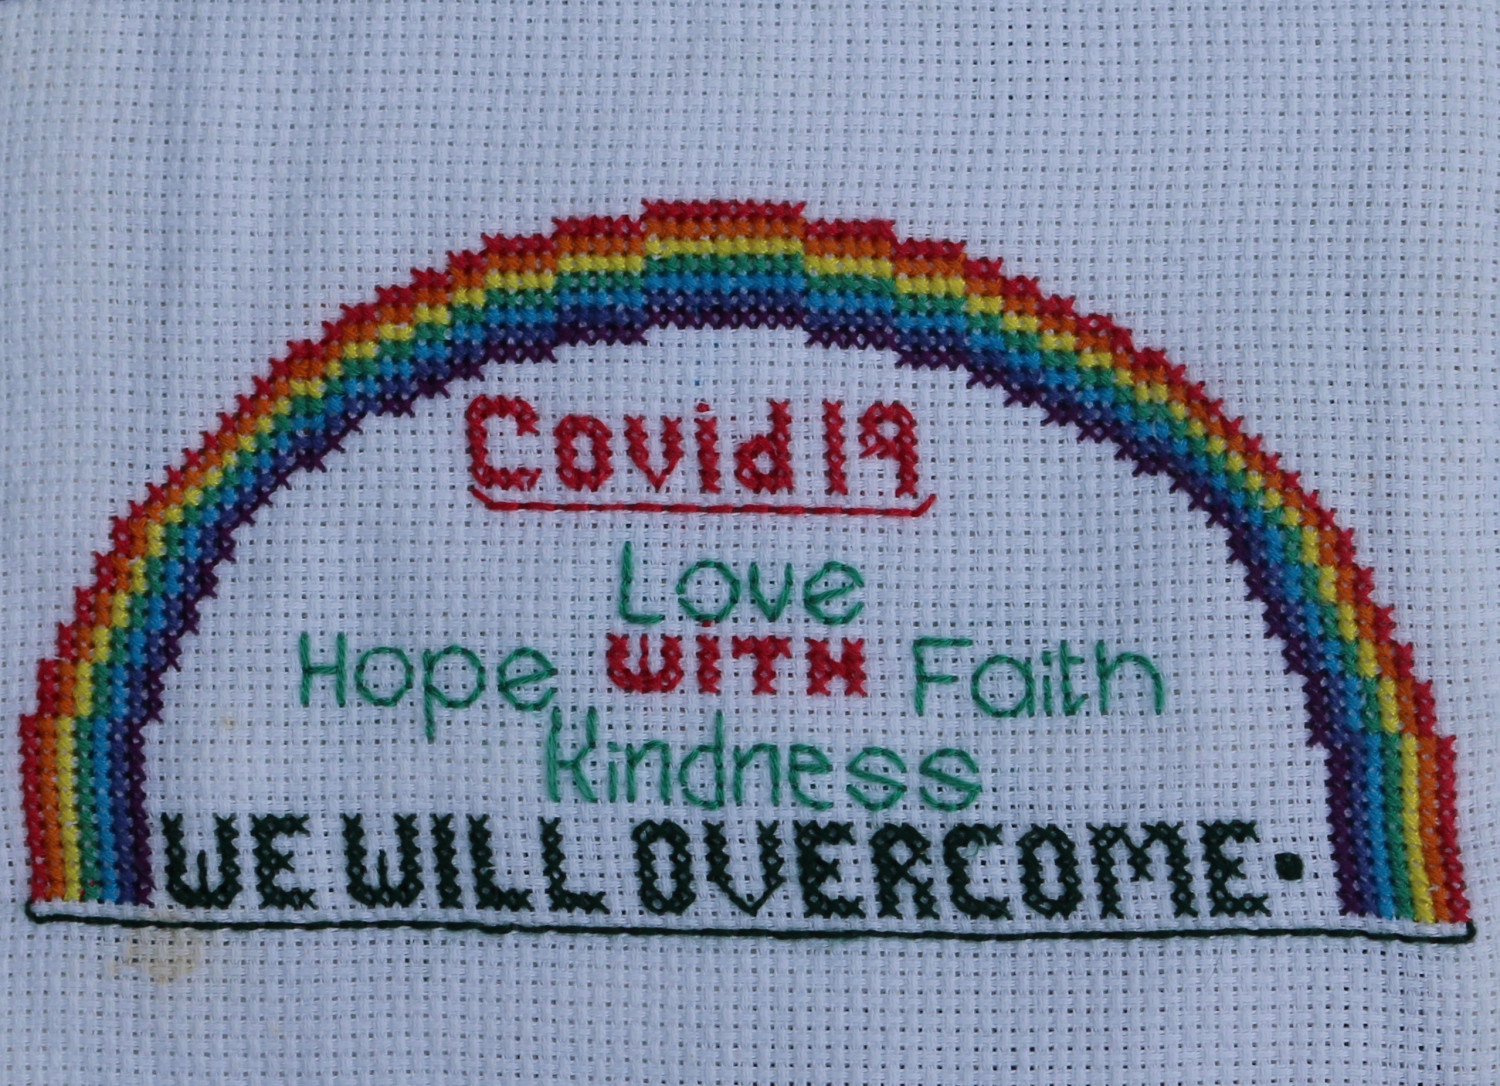 Embroidery of a rainbow and words: Covid 19, Love, Hope with Faith, Kindness, We will overcome